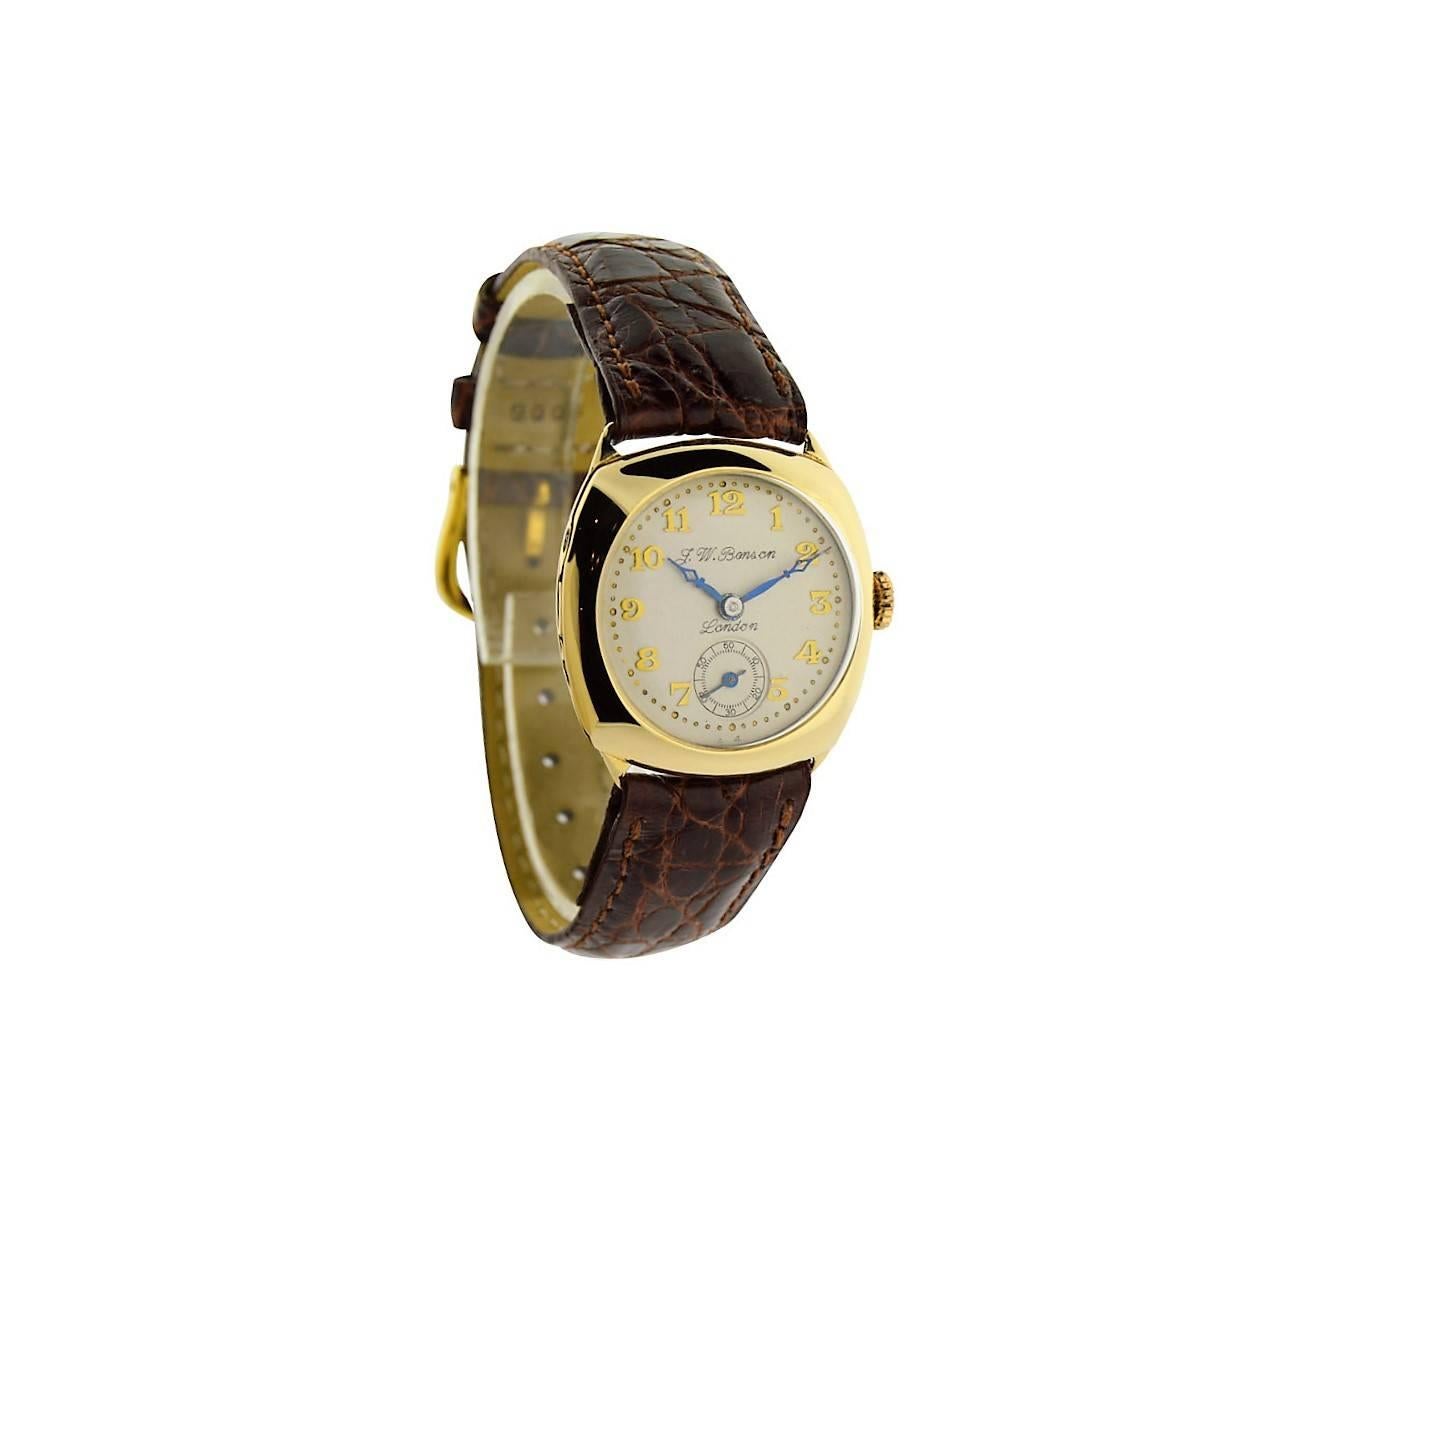 FACTORY / HOUSE: J. W. Benson / London
STYLE / REFERENCE: Cushion Shaped / Military Style
METAL / MATERIAL: 9Kt Yellow Gold
DIMENSIONS:  32mm  X  30mm
CIRCA: 1920's
MOVEMENT / CALIBER: Manual Winding / 15 Jewels
DIAL / HANDS: Silvered / Arabic